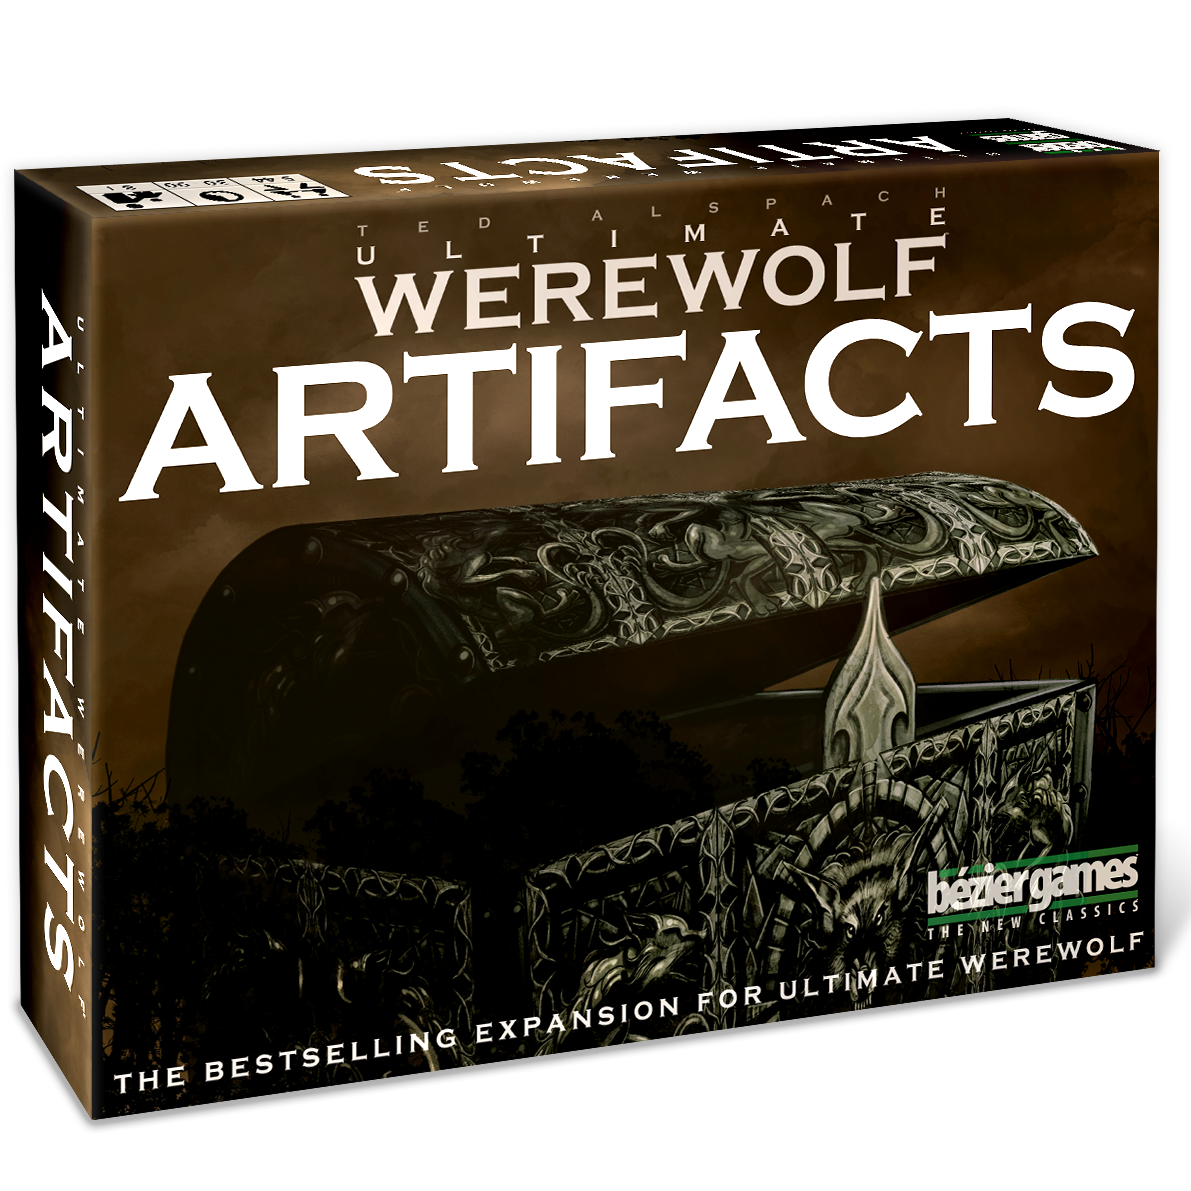 (BSG Certified USED) Ultimate Werewolf - Artifacts Expansion